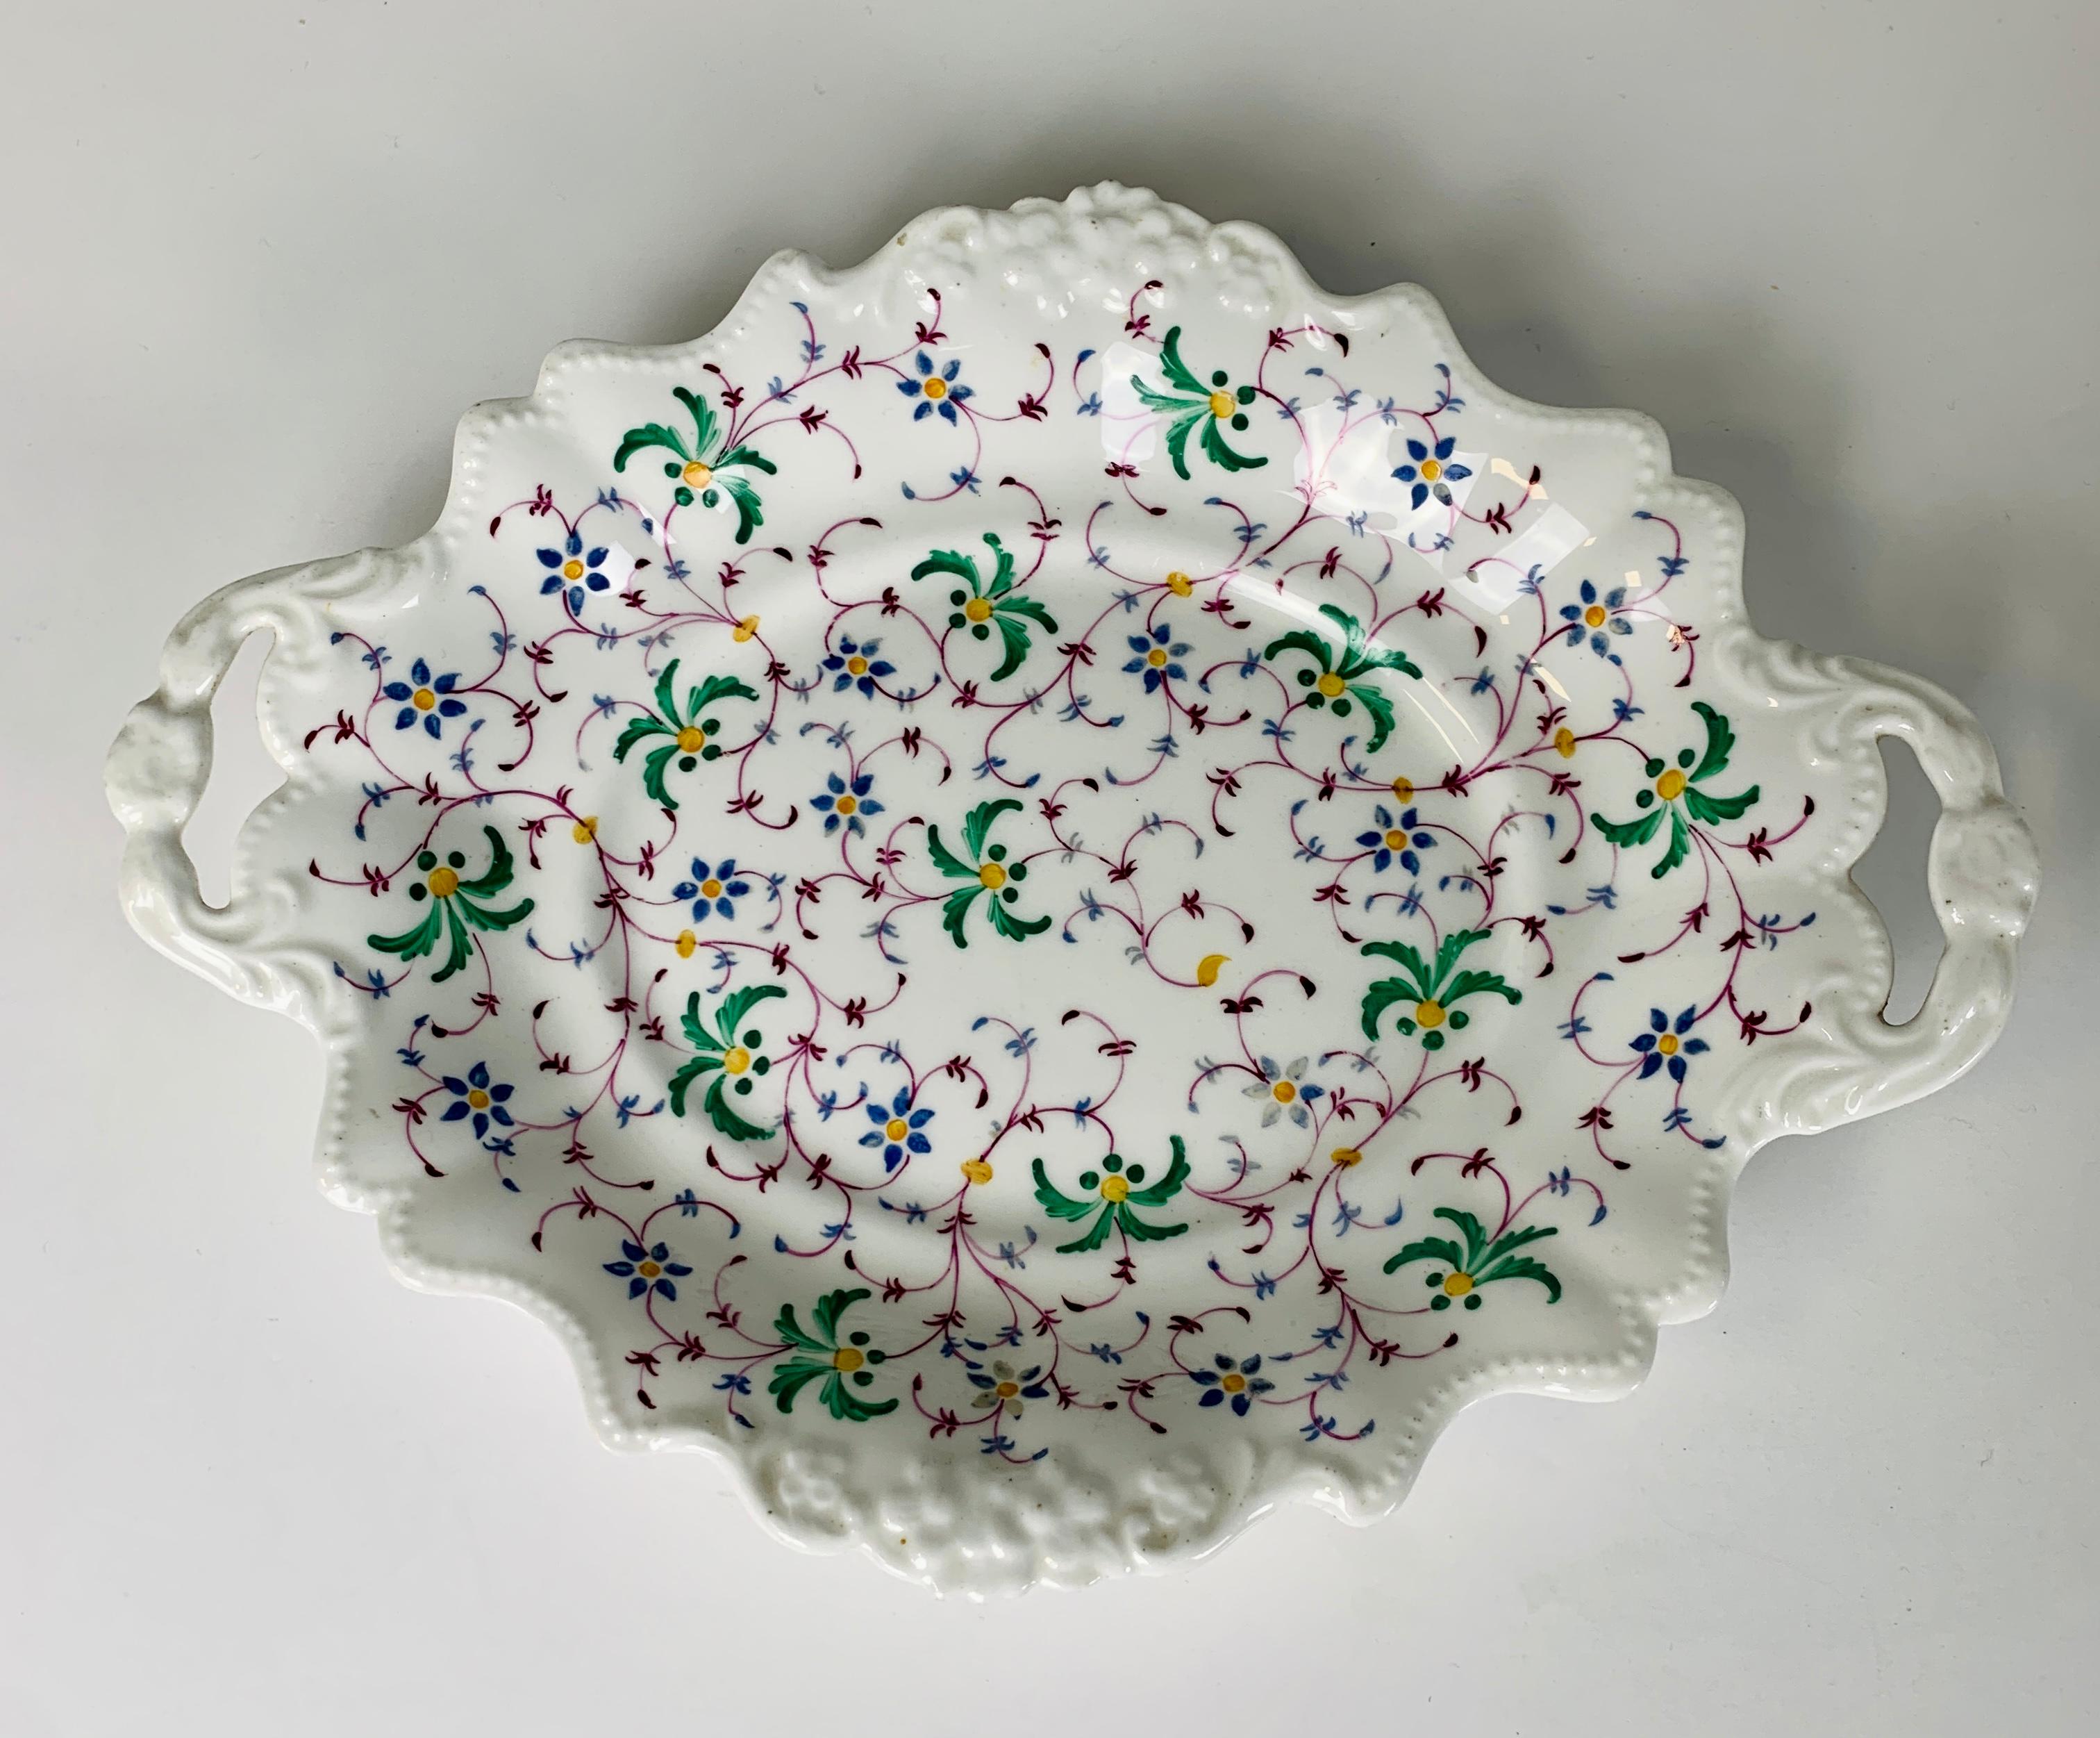 Provenance: The Private Collection of Mario Buatta a group of three shaped dishes decorated with similar red and green
floral patterns. Made of earthenware in England circa 1830 this group of three dishes have a lovely informal feel.
Mario